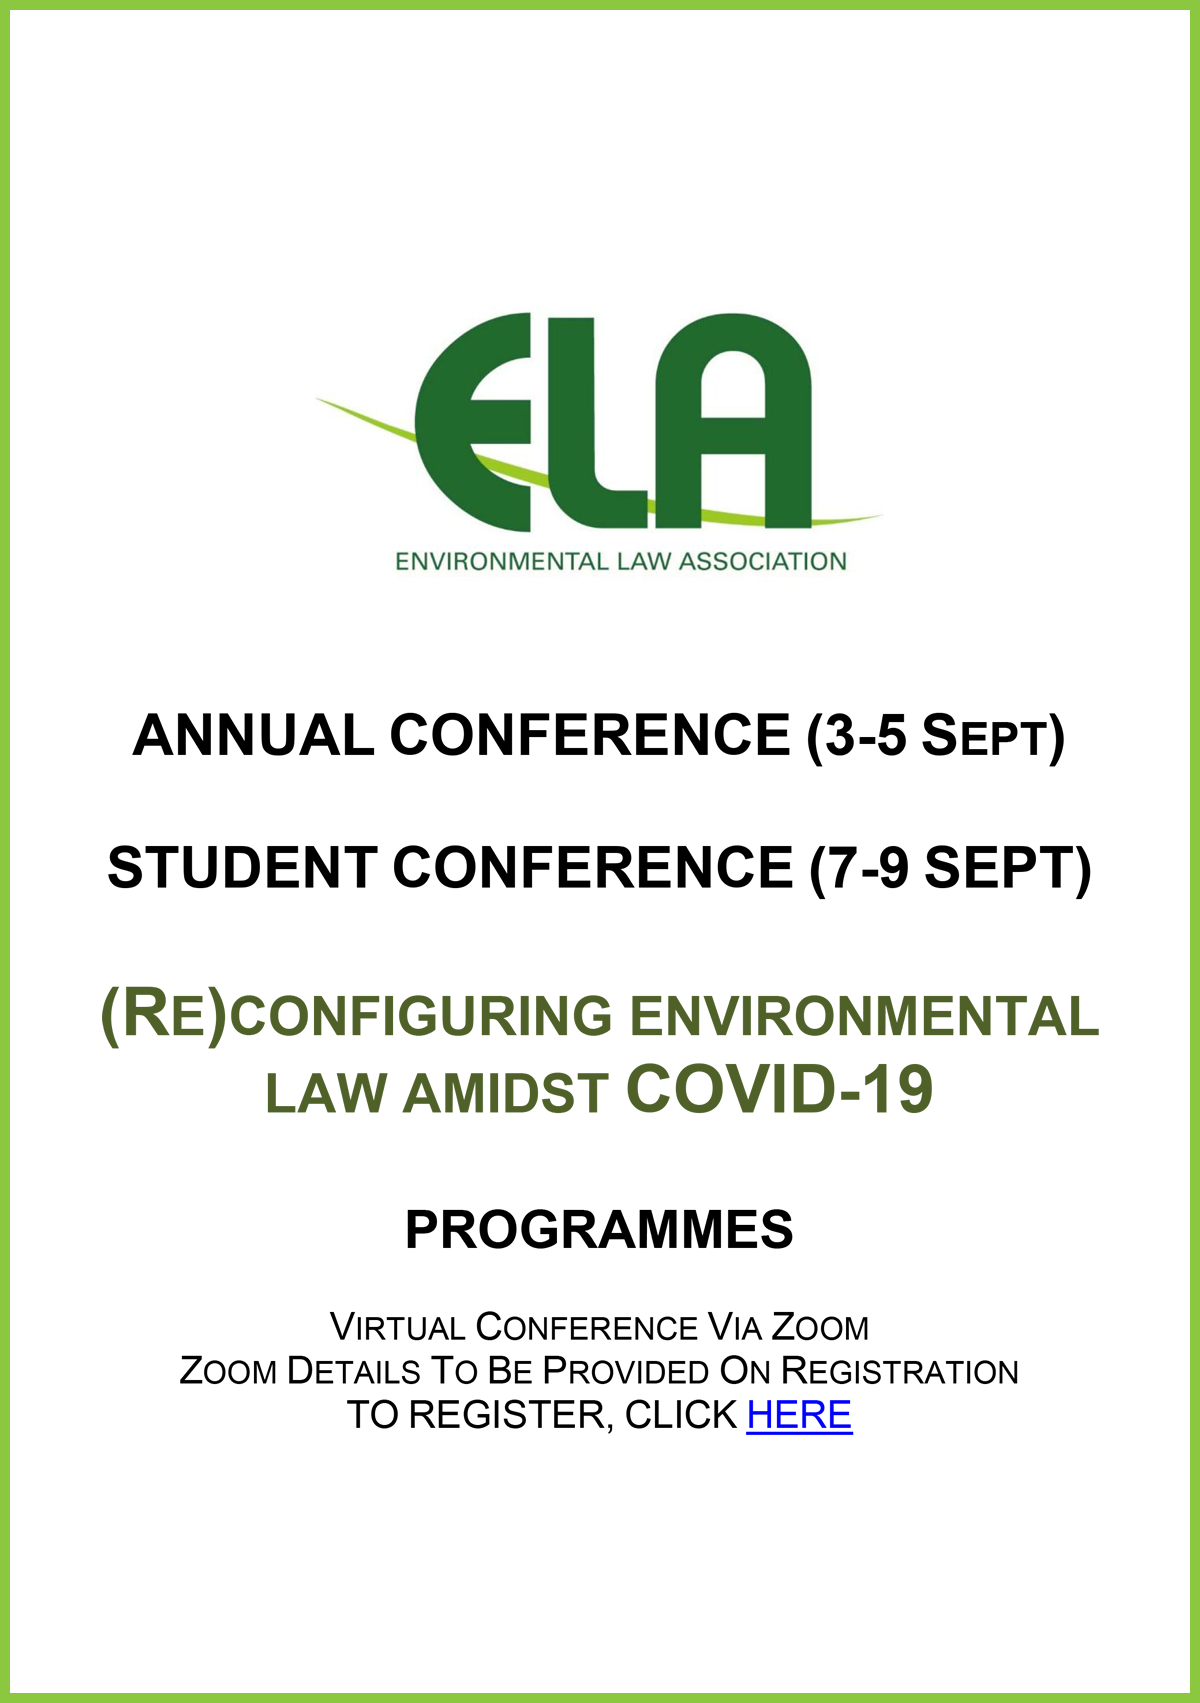 9th Annual and Student Conference ("(Re)configuring environmental law amidst COVID19")